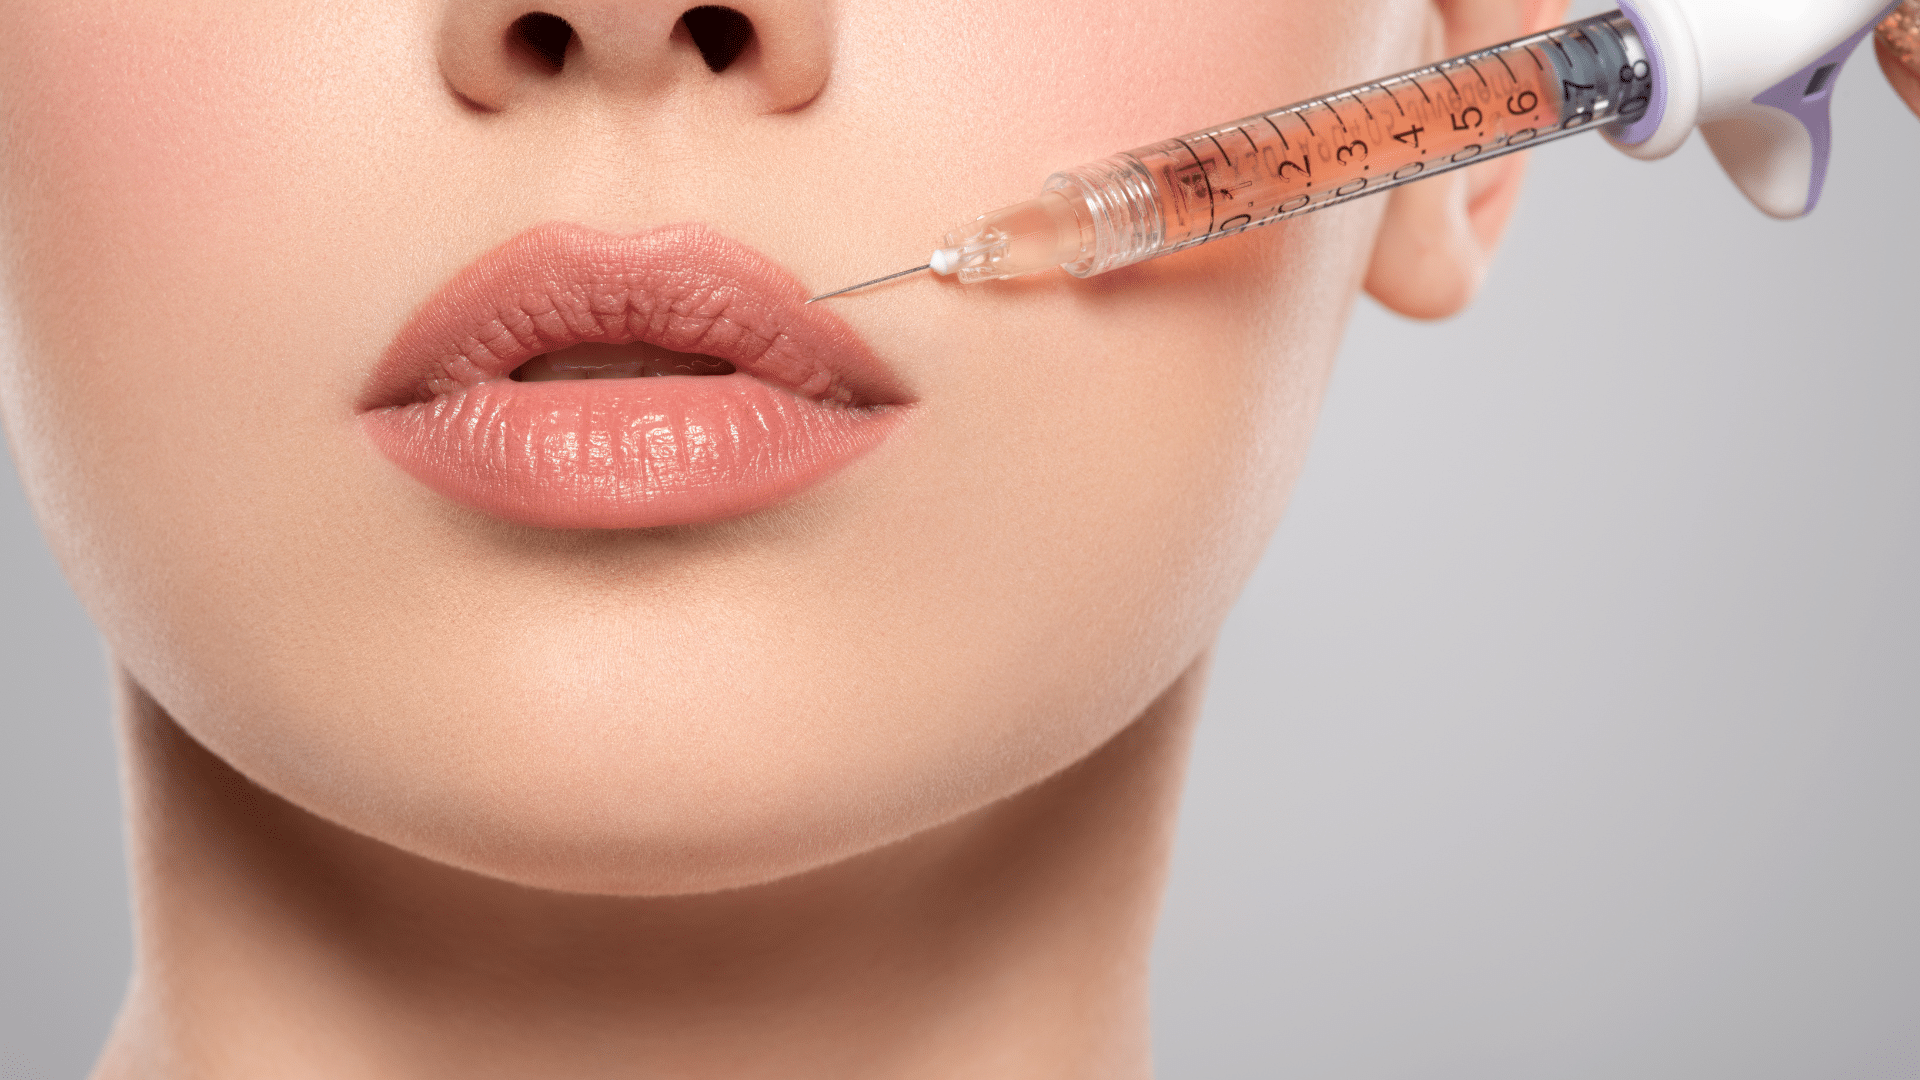 Woman getting lip injections.